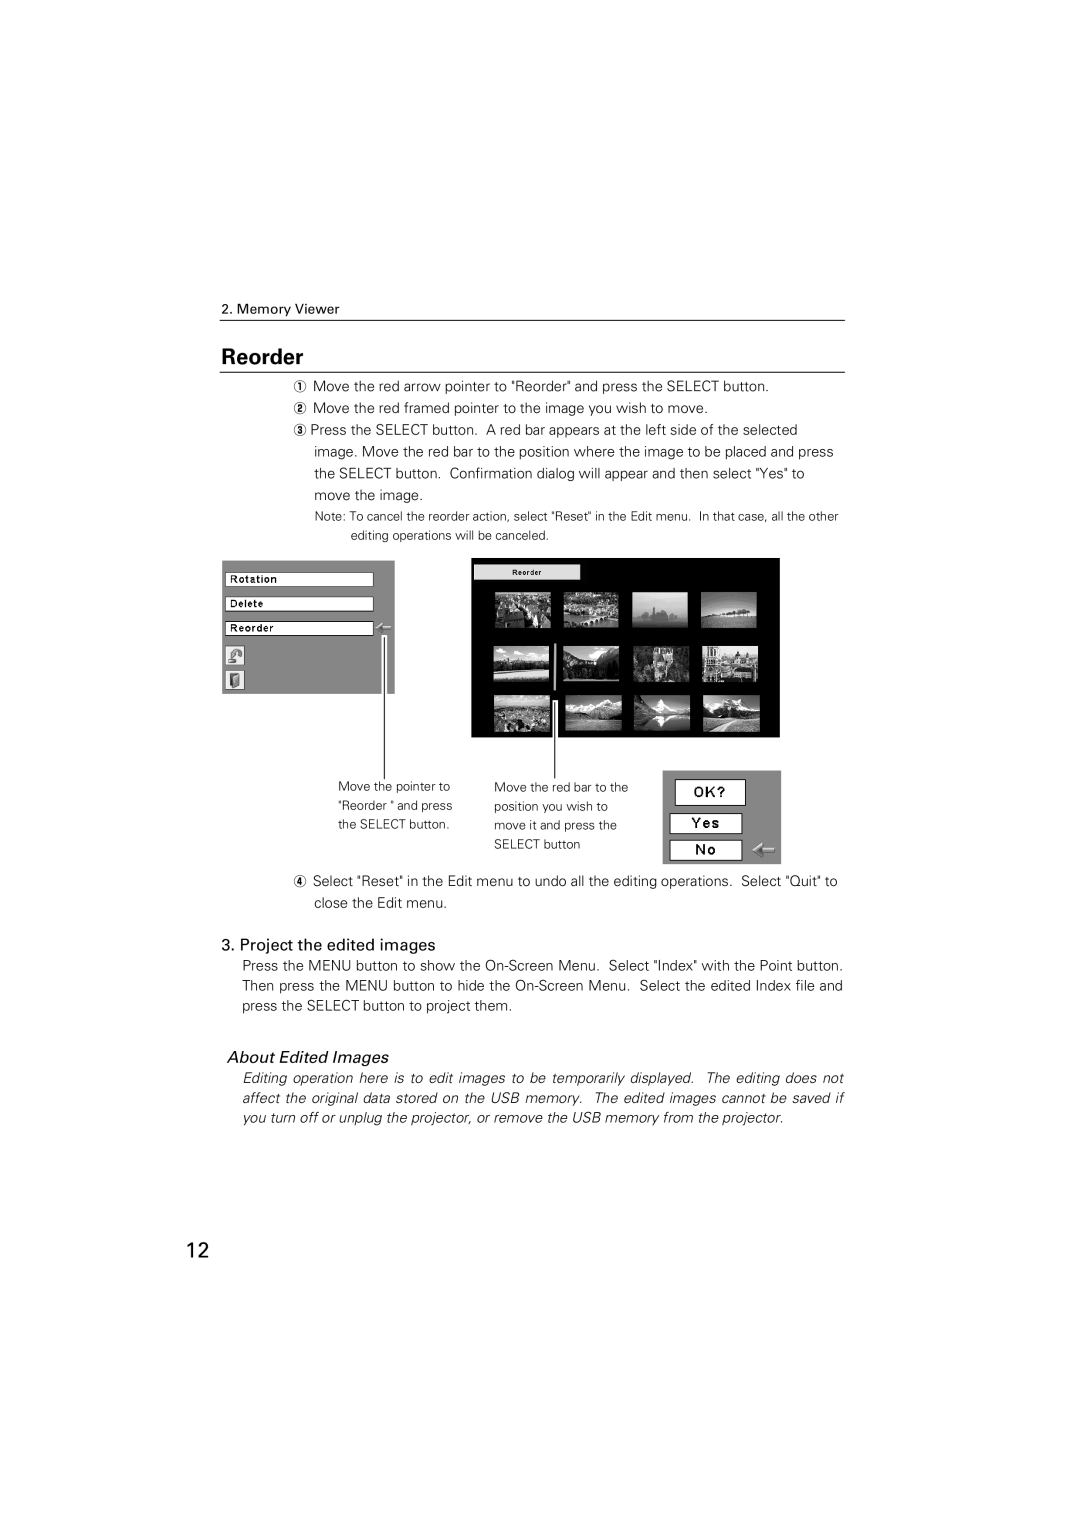 Sanyo POA-USB02 owner manual Reorder, Project the edited images, About Edited Images 